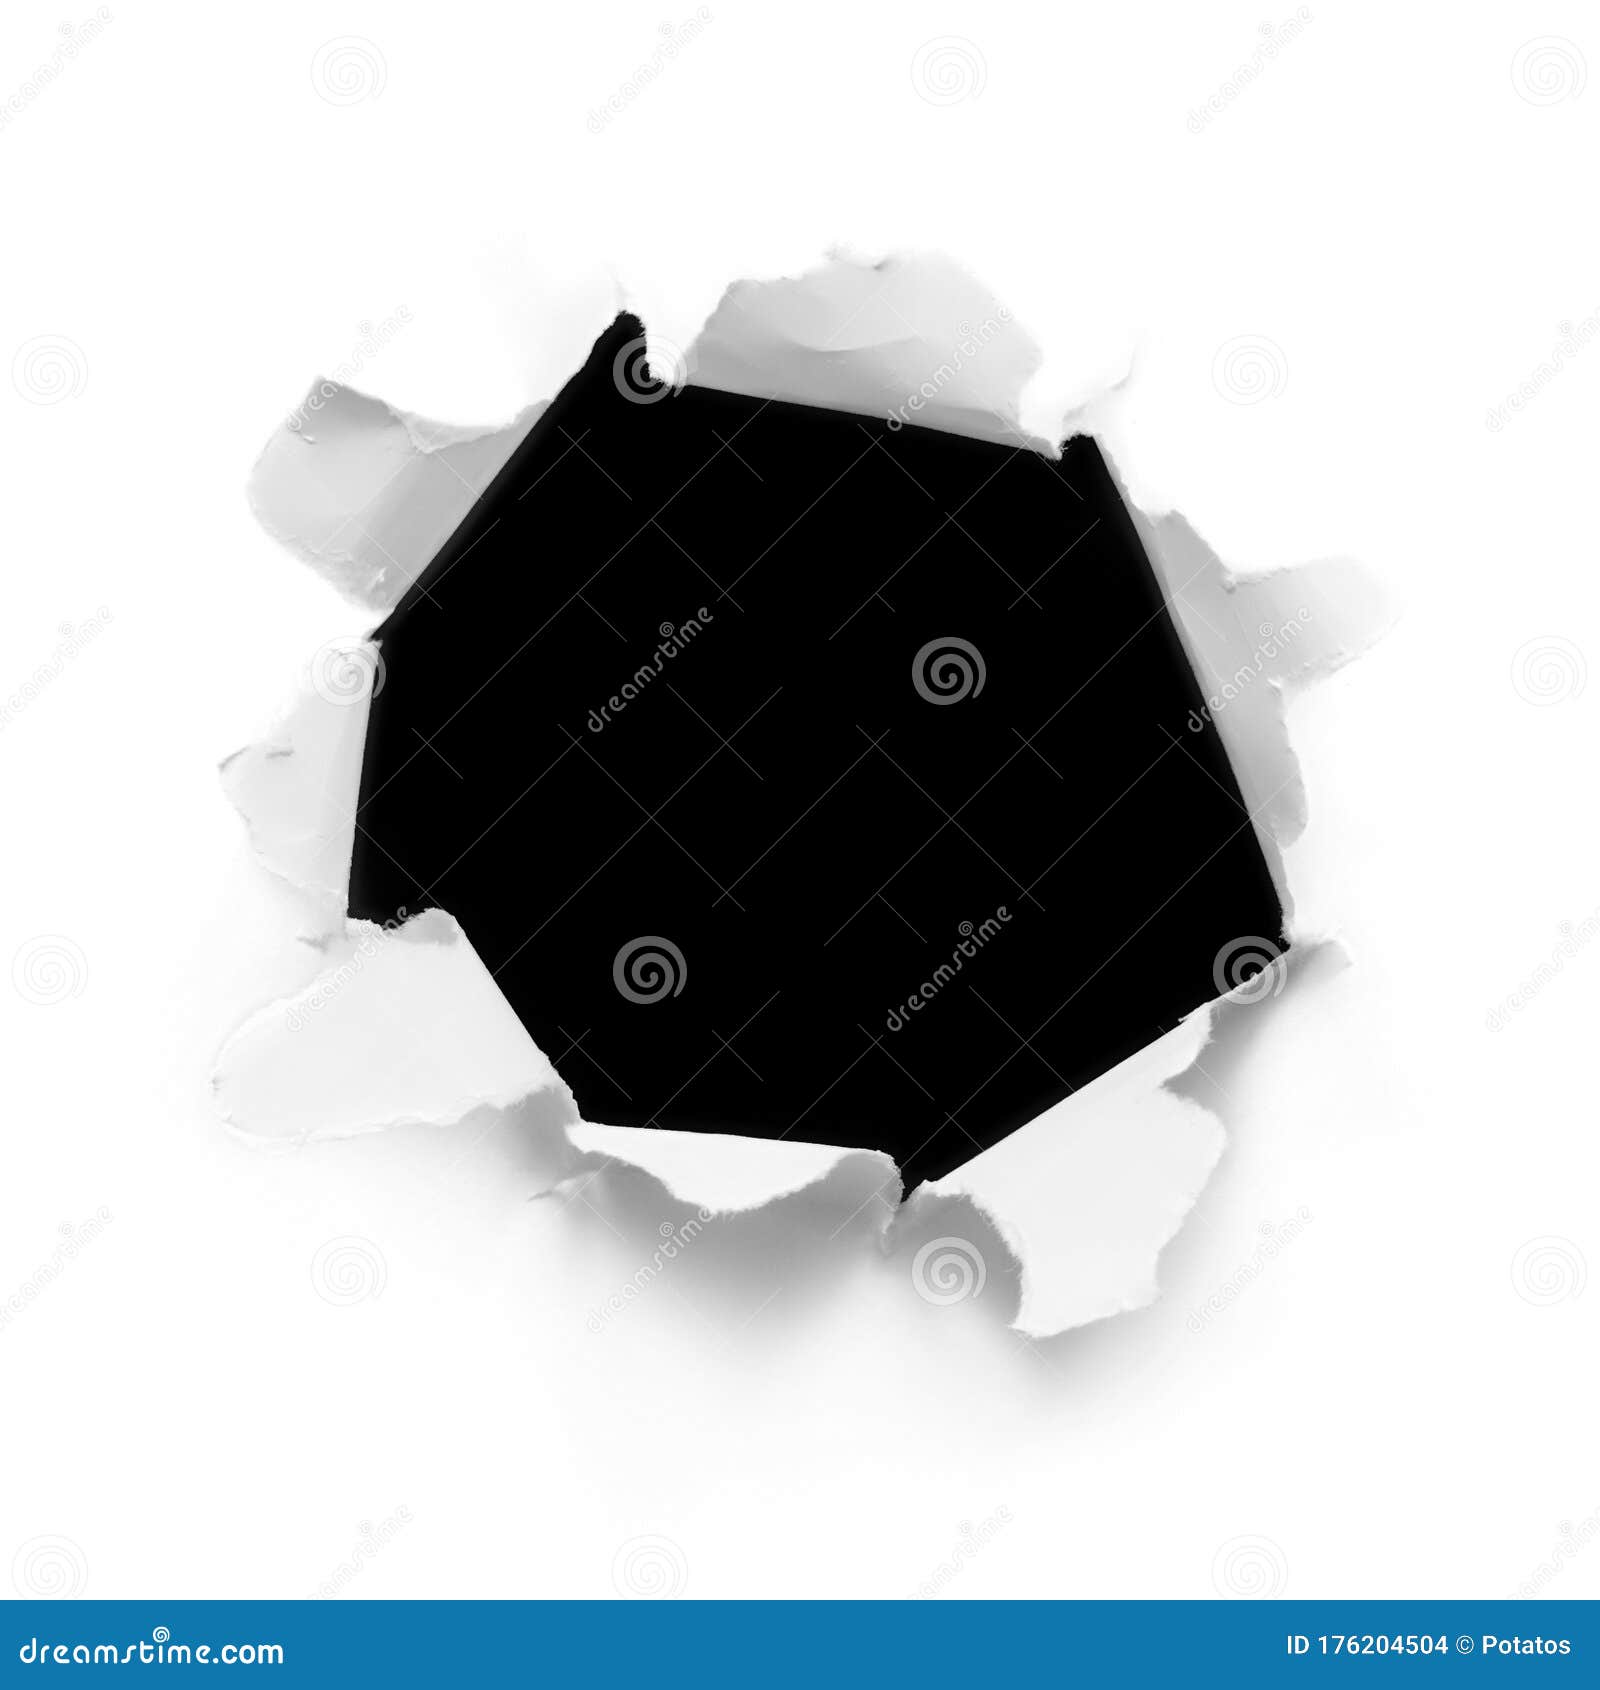 breakthrough white paper hole. torn ripped cardboard paper sheet round hole on black background 